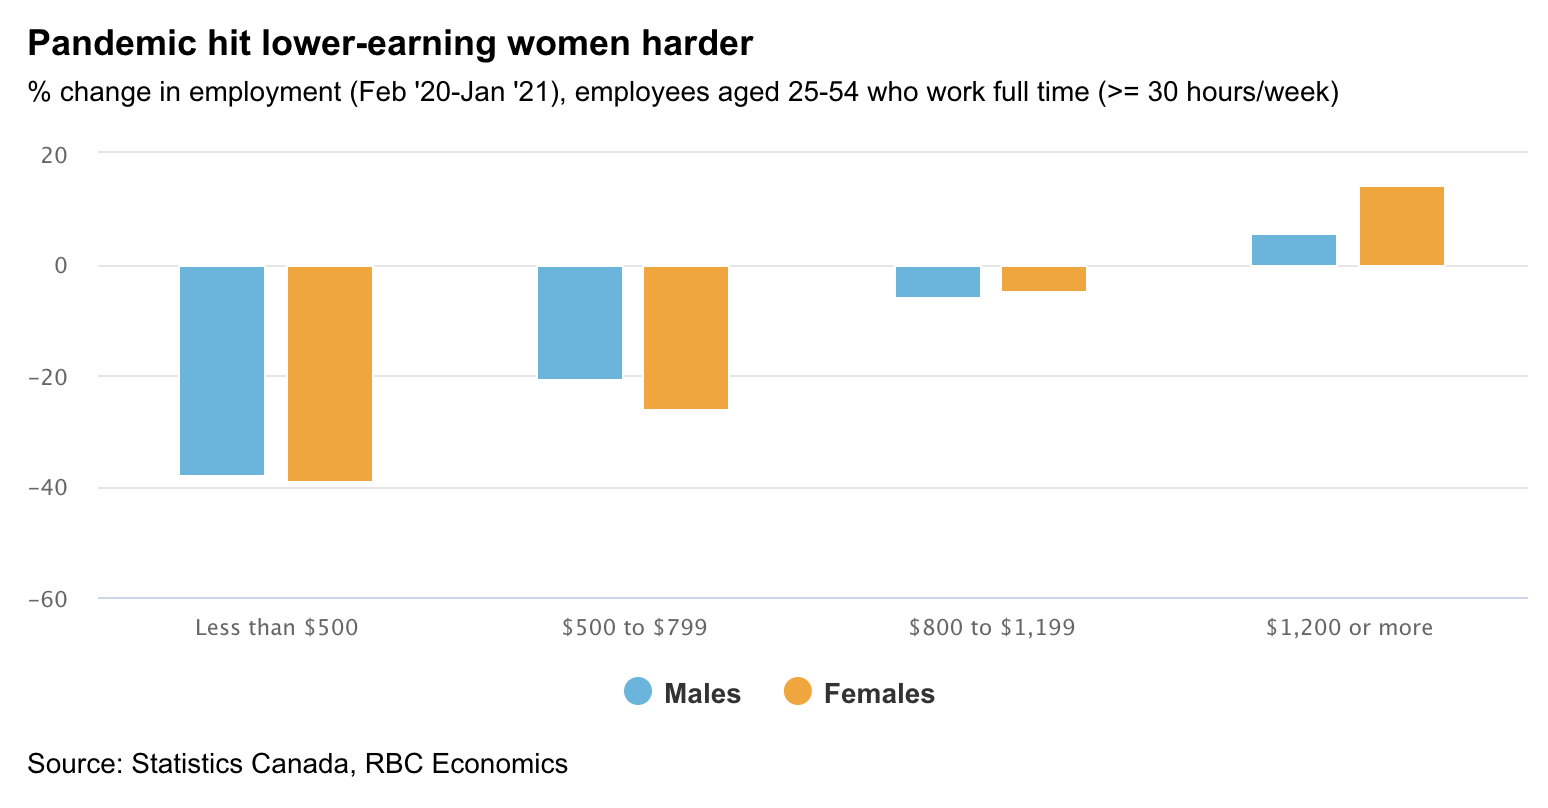 Chart showing that lower-earning women were hit hard in terms of employment in the pandemic